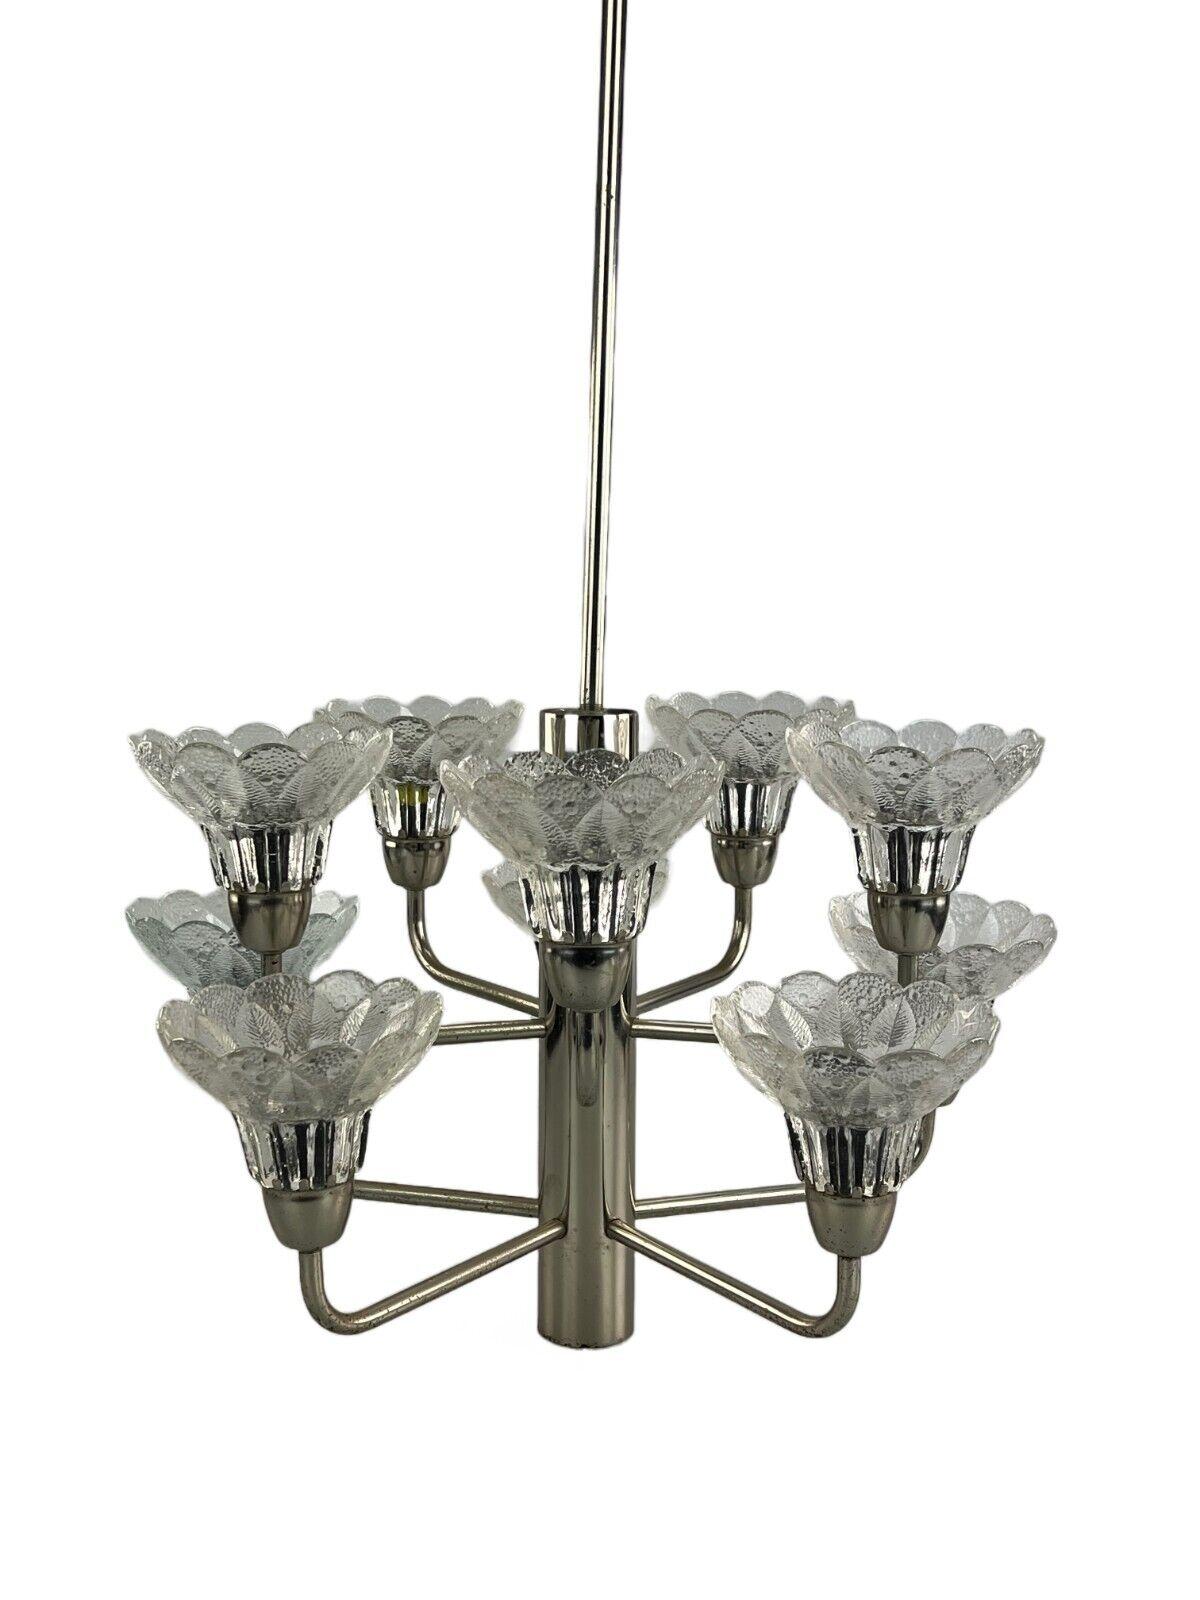 60s 70s Lamp fixture chandelier glass space age design.

Object: chandelier

Manufacturer:

Condition: good

Age: around 1960-1970

Dimensions:

Diameter = 50cm
Hanging height = 86cm

Other notes:

10x E14 socket

The pictures